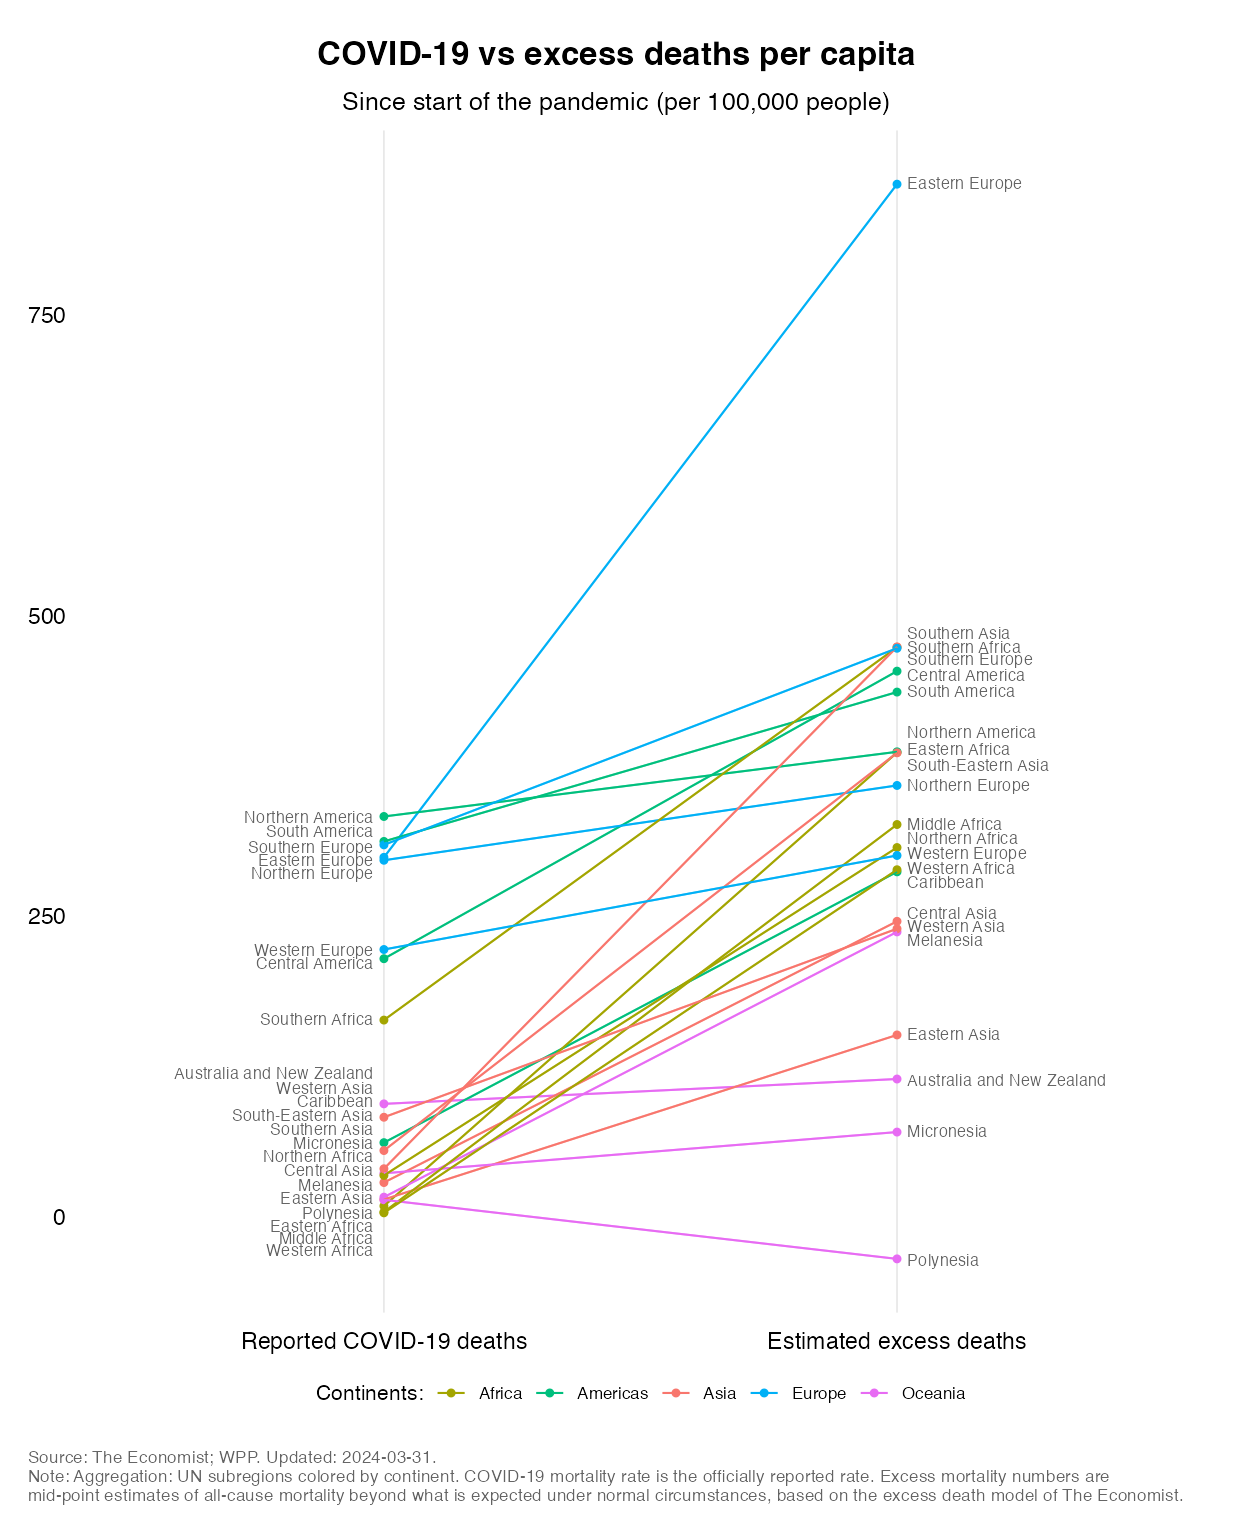 Comparison of mortality rates across UN subregions and mortality concepts (COVID-19 mortality versus excess mortality)